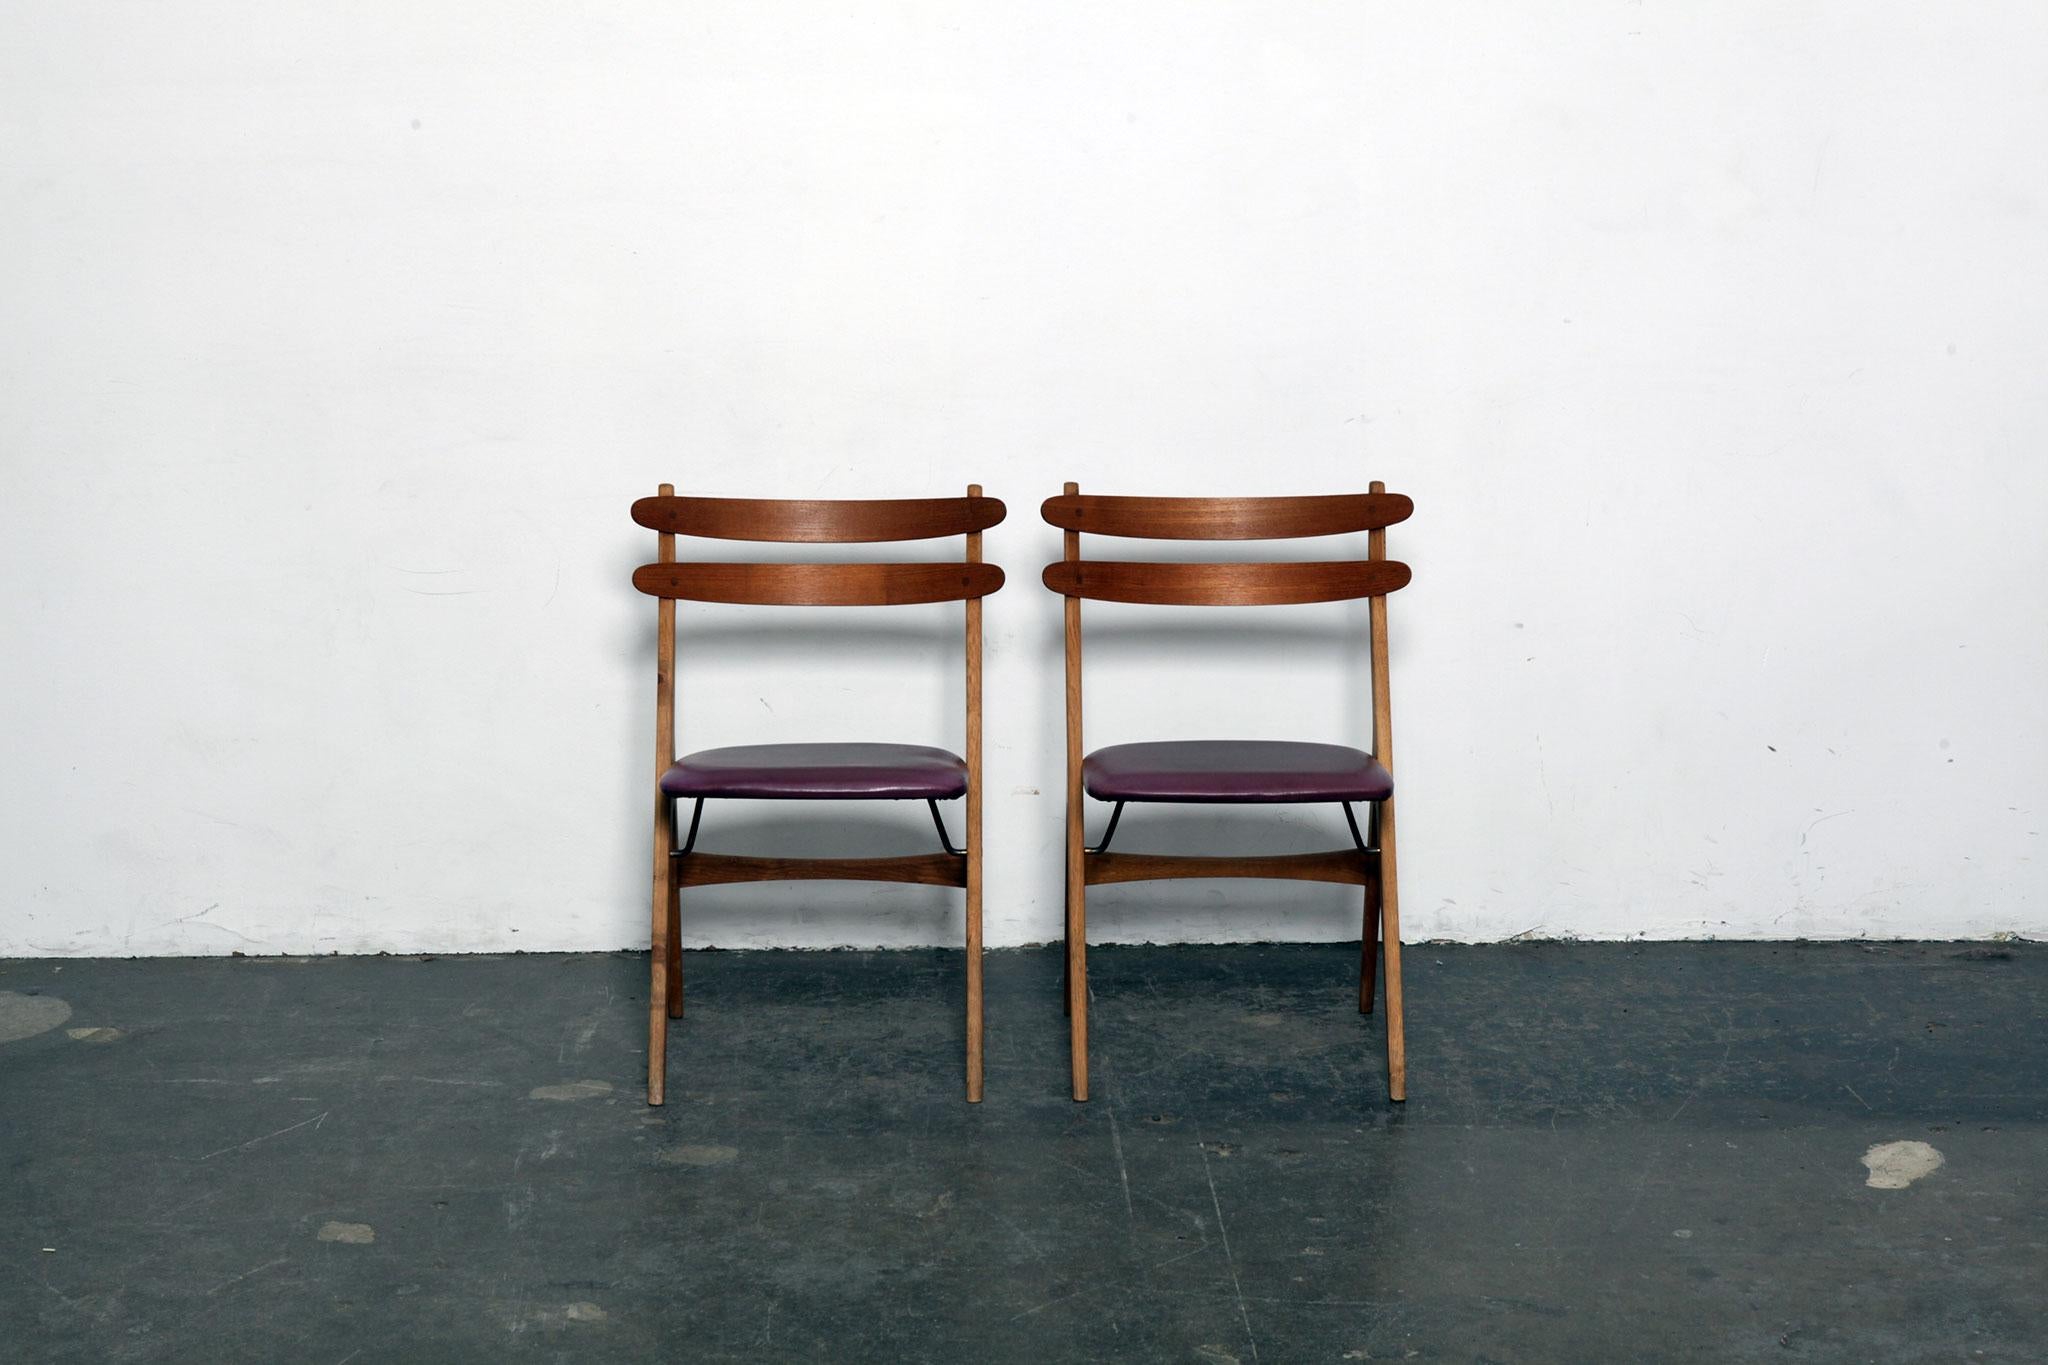 Pair of Danish 1950s side chairs with bent teak backs, oak 'A' frames with brass supports, newly upholstered in a plum colored leather and newly refinished. Designed by Poul Volther.